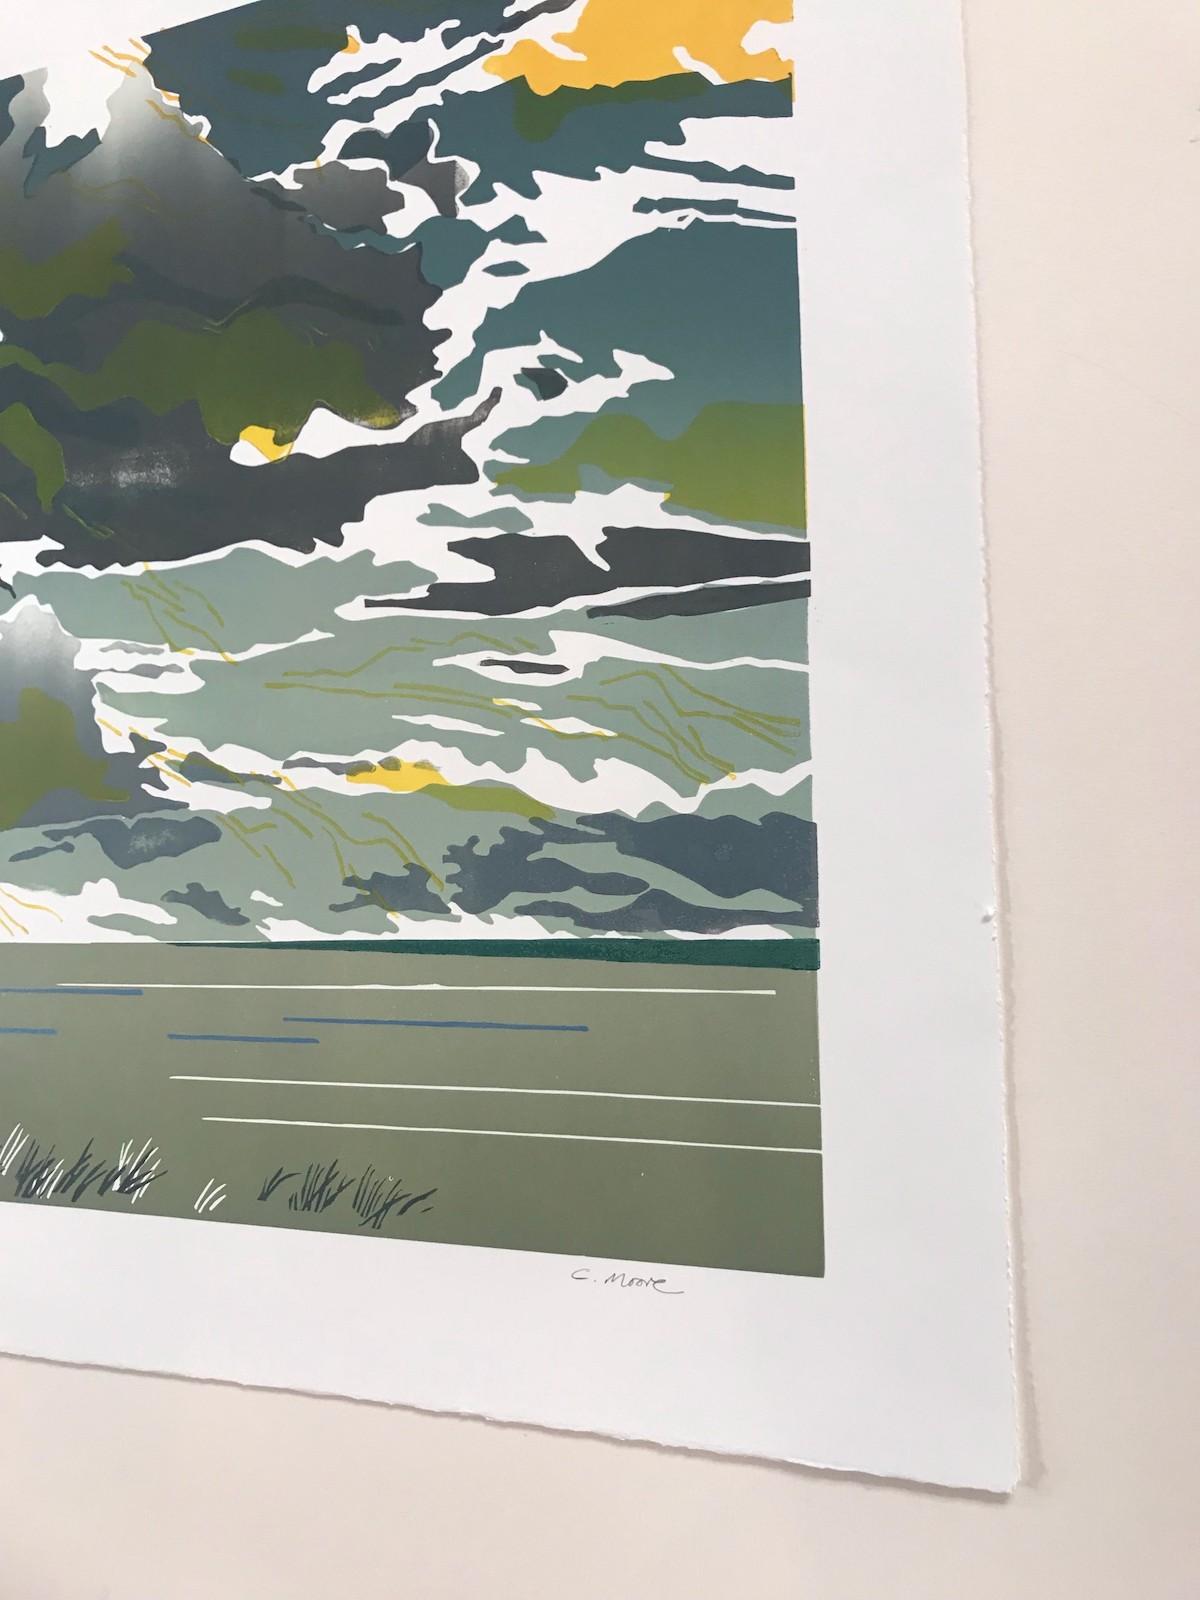 The Lost Ball' is a handmade linocut print by artist Colin Moore, featuring his signature graphic use of line and sophisticated colour palette. This handmade print uses layered tones of green, grey and yellow to capture the moody atmosphere of a